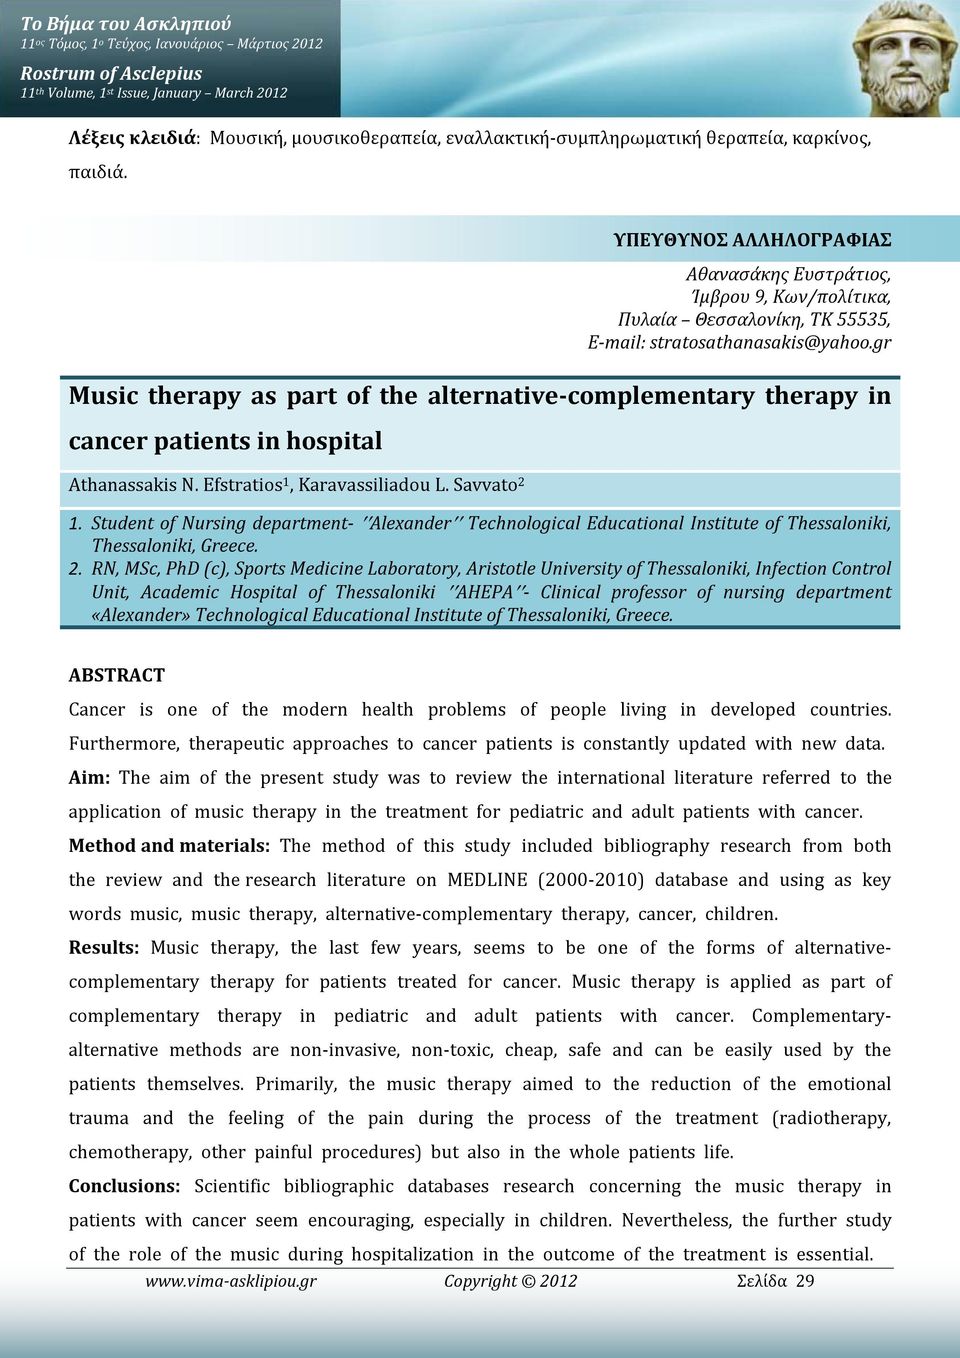 gr Music therapy as part of the alternative-complementary therapy in cancer patients in hospital Athanassakis N. Efstratios 1, Karavassiliadou L. Savvato 2 1.